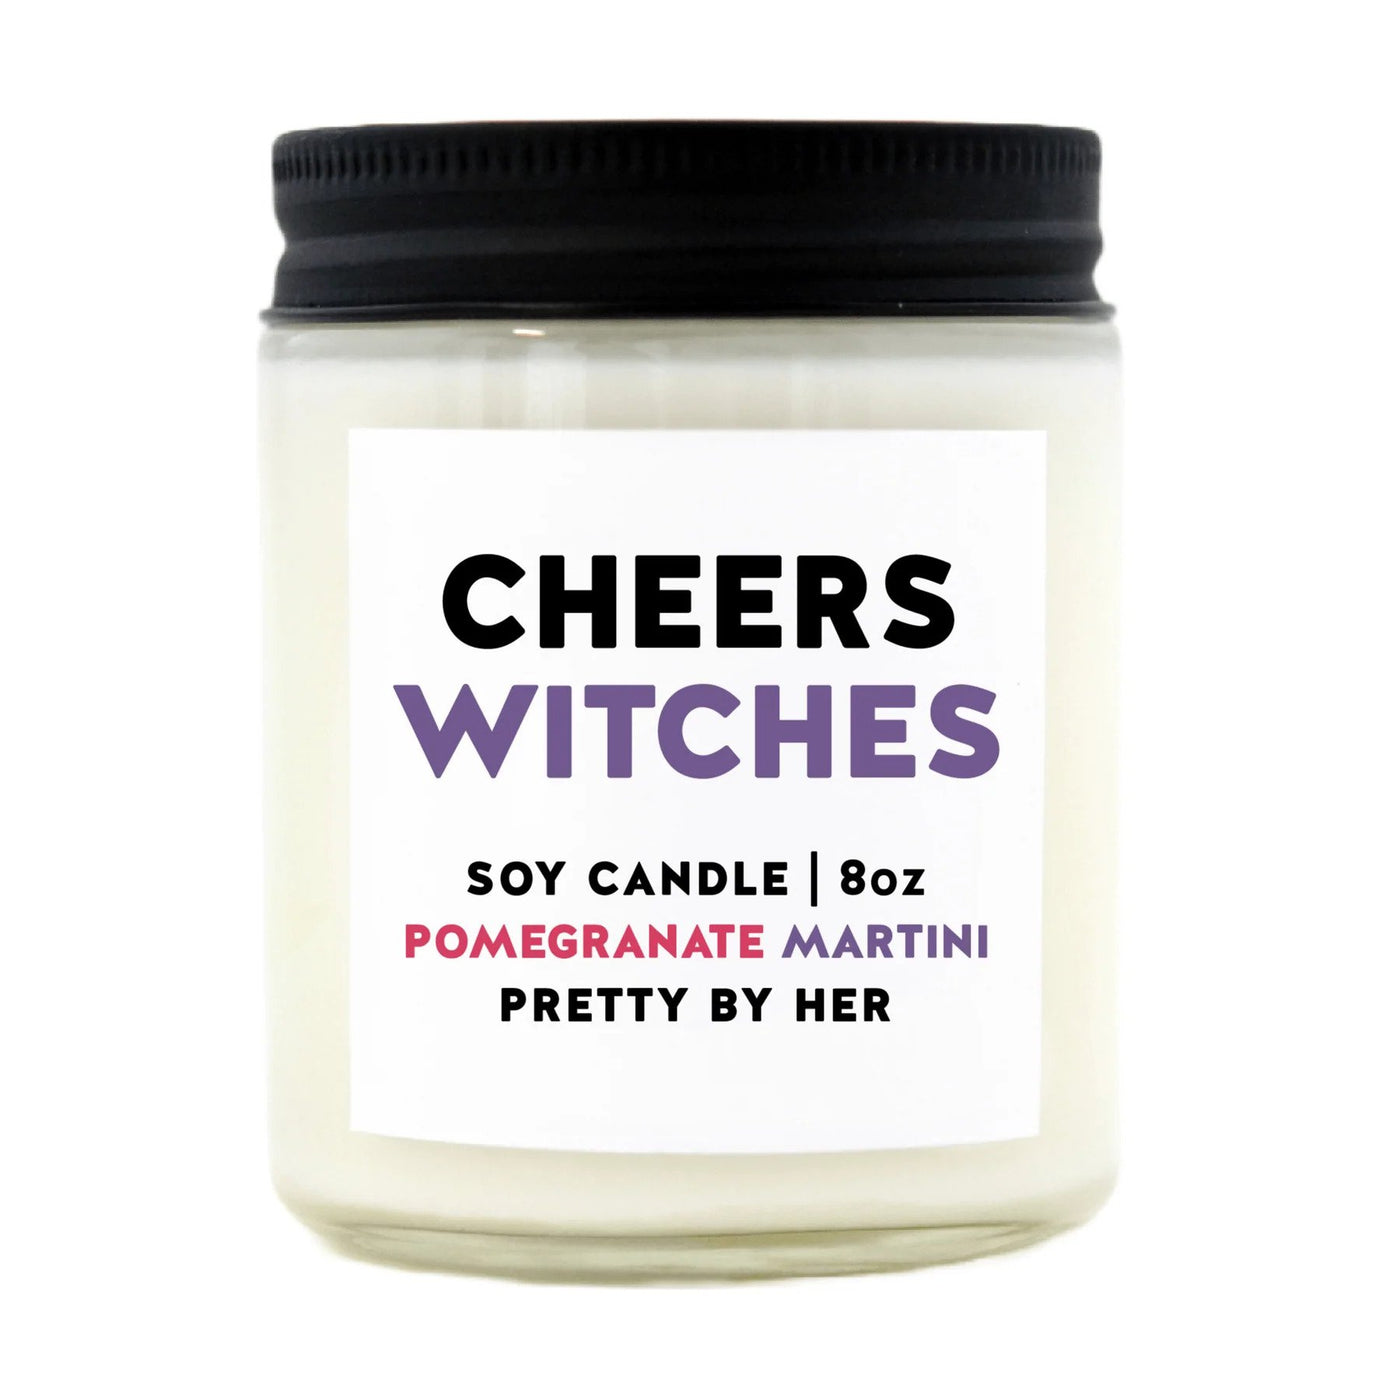 Cheers Witches Candle